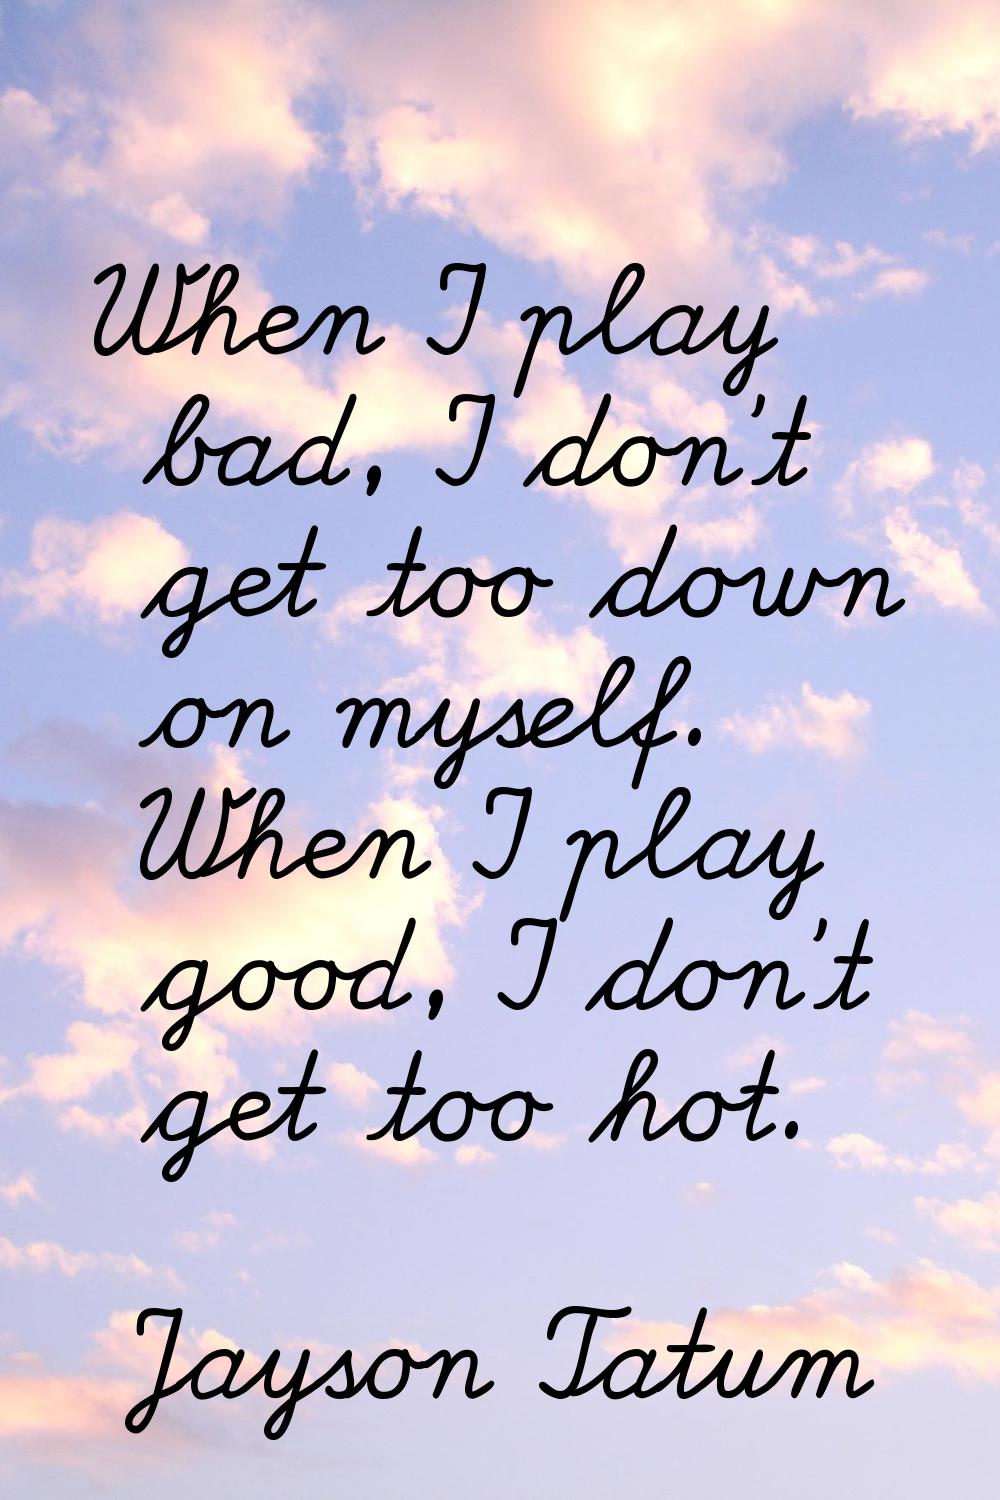 When I play bad, I don't get too down on myself. When I play good, I don't get too hot.